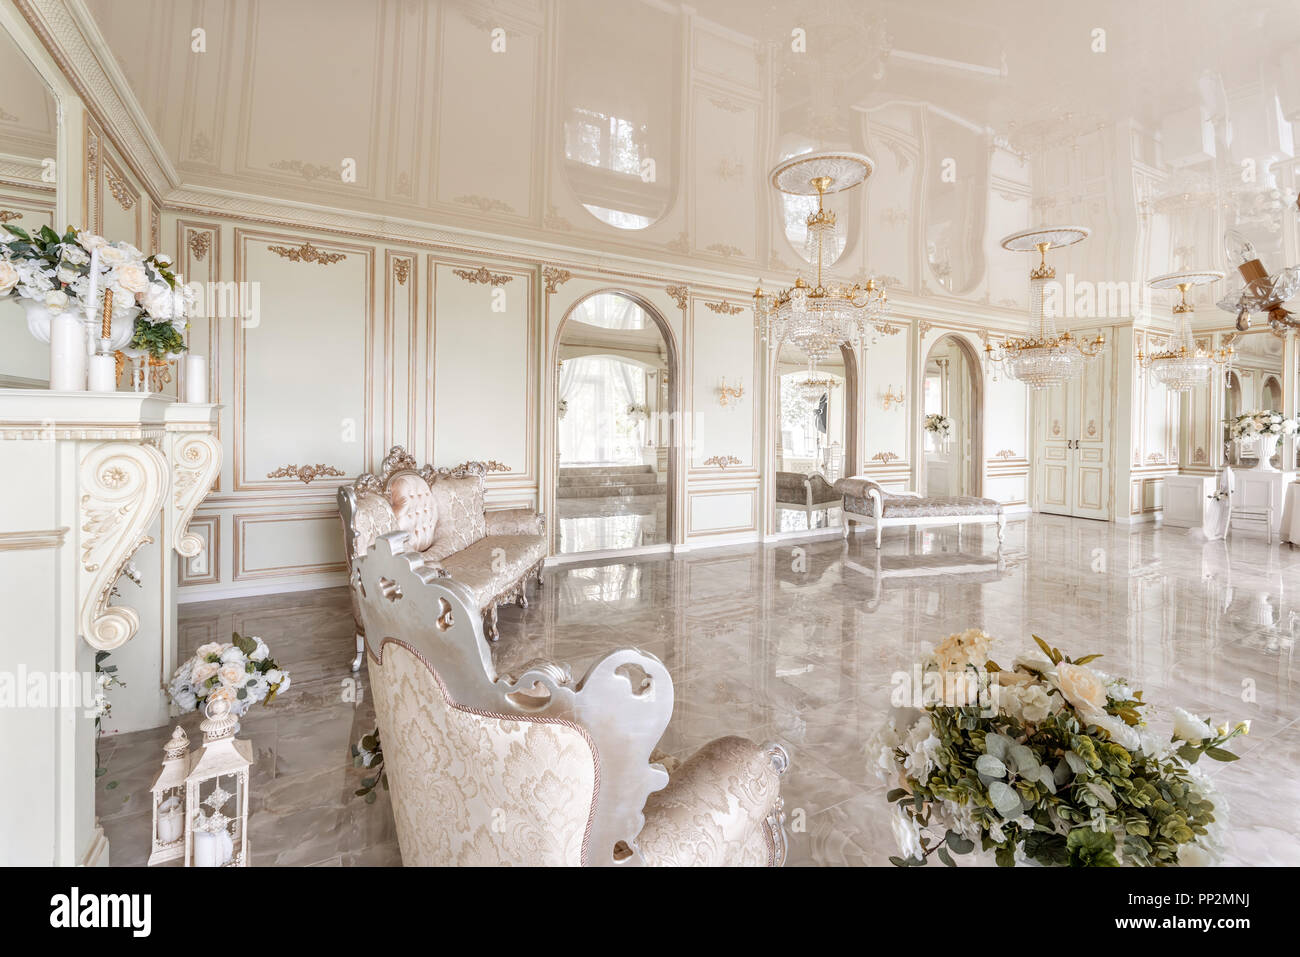 Morning In Luxurious Light Interior In Mansion Bright And